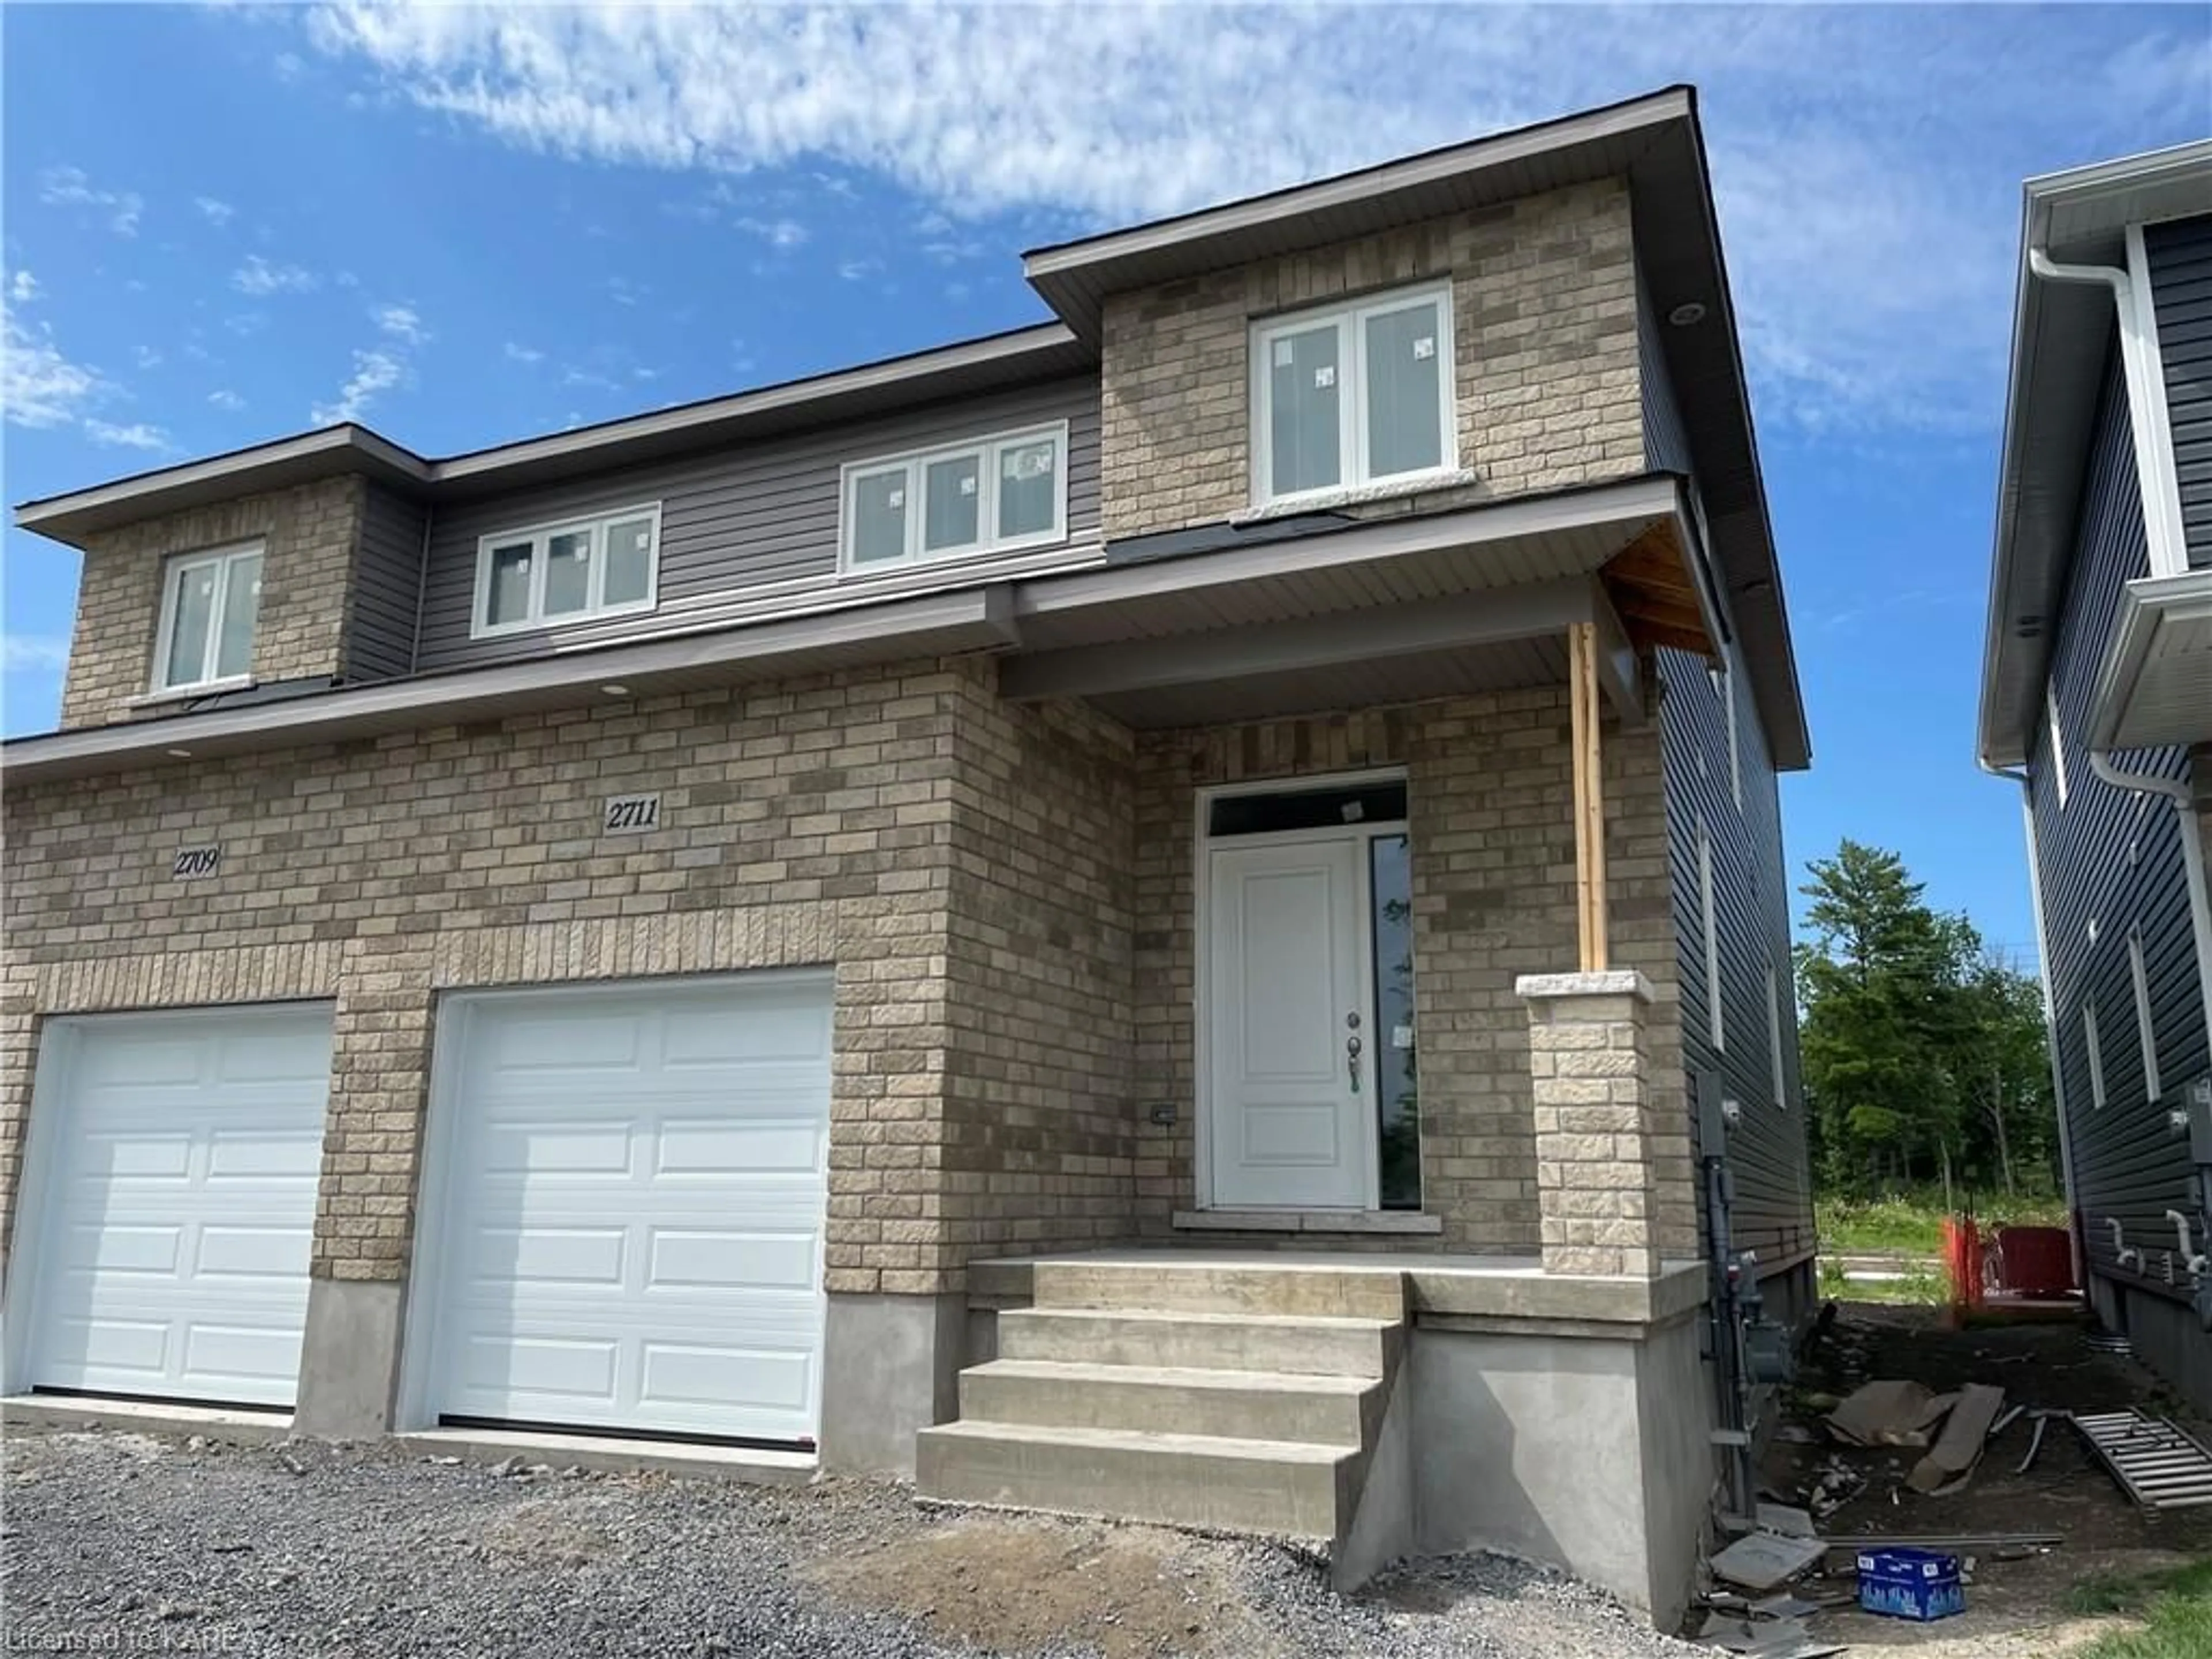 Home with brick exterior material for 2711 Delmar St, Kingston Ontario K7P 0J1